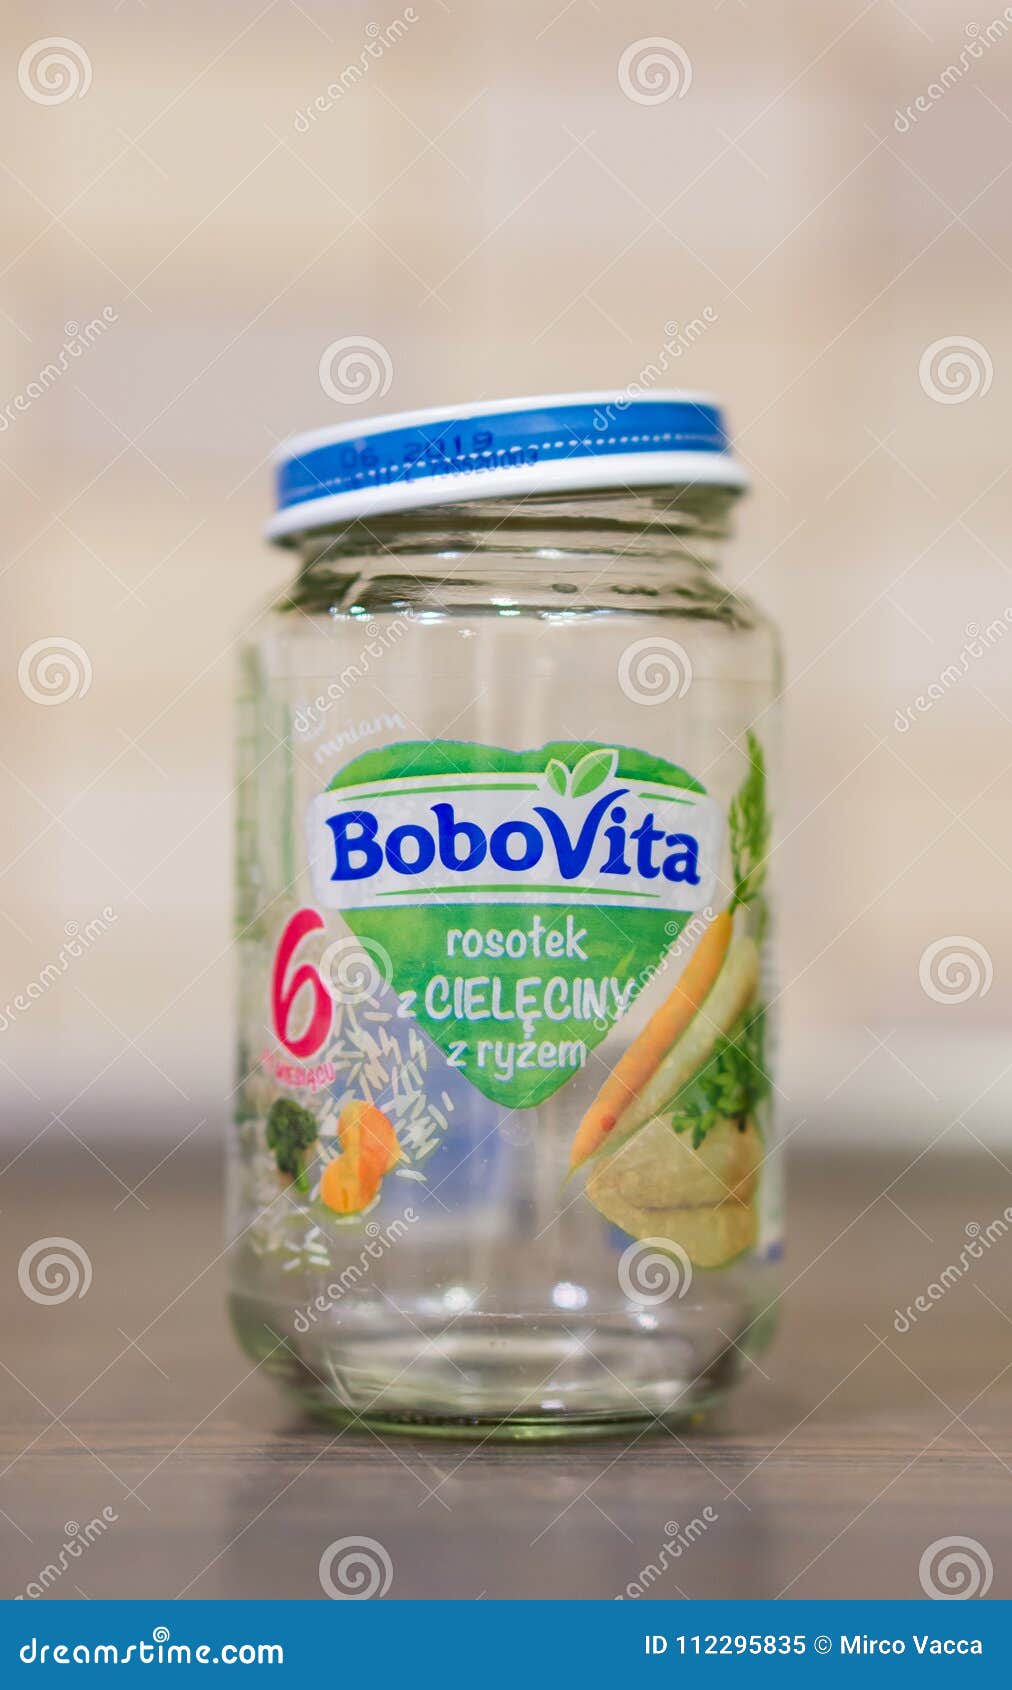 Empty Baby Food Jar Photos Free Royalty Free Stock Photos From Dreamstime